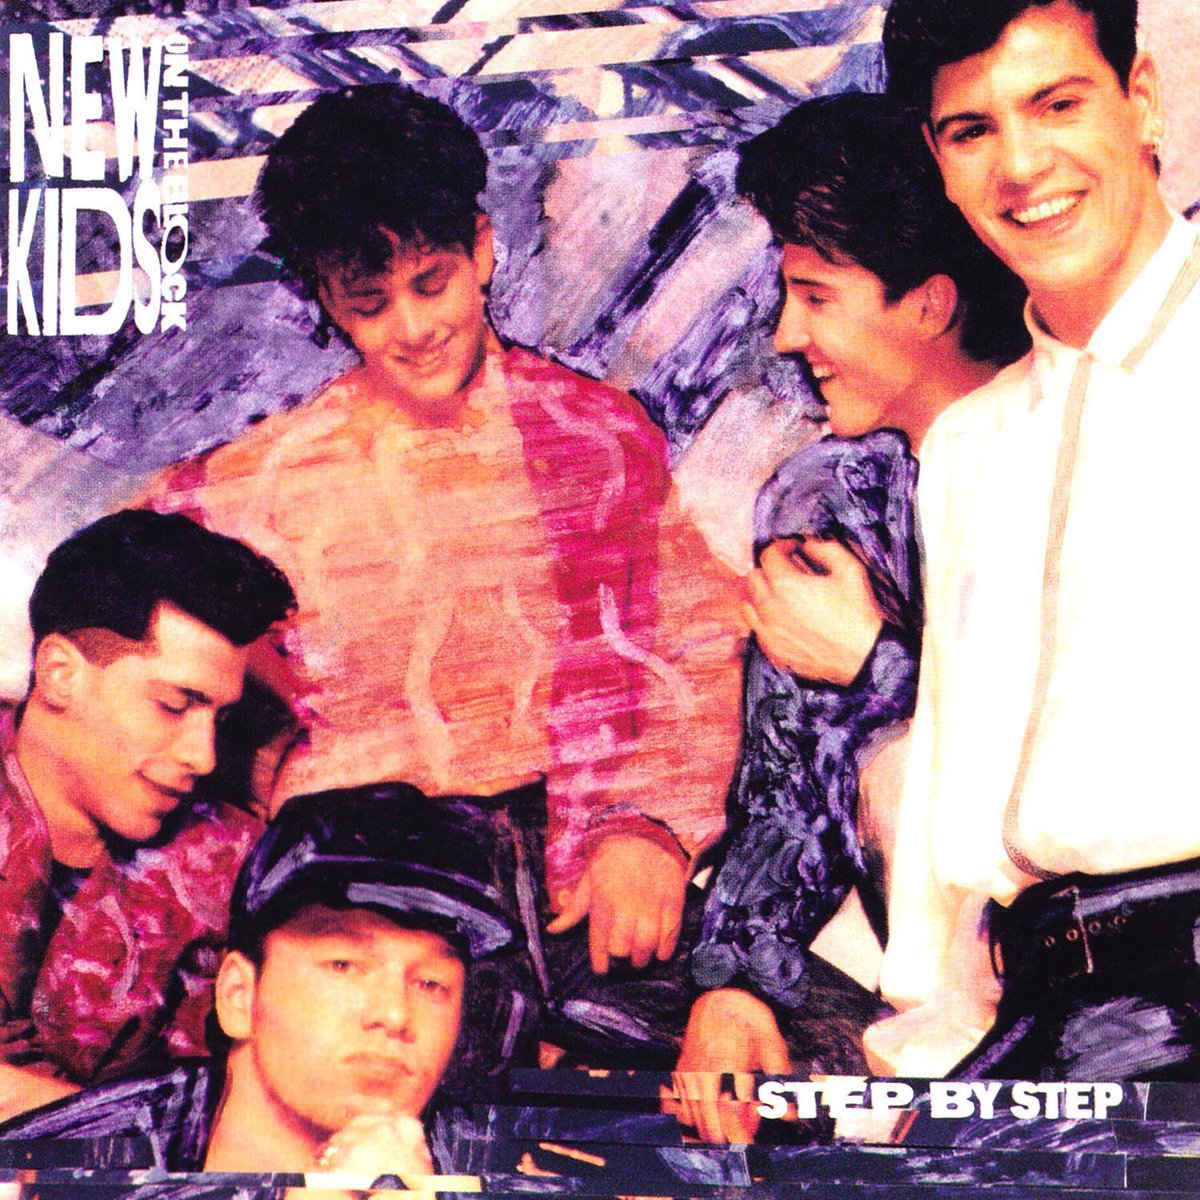 🎶New Kids on the Block released their song 'Step By Step' 34 years ago, May 10, 1990